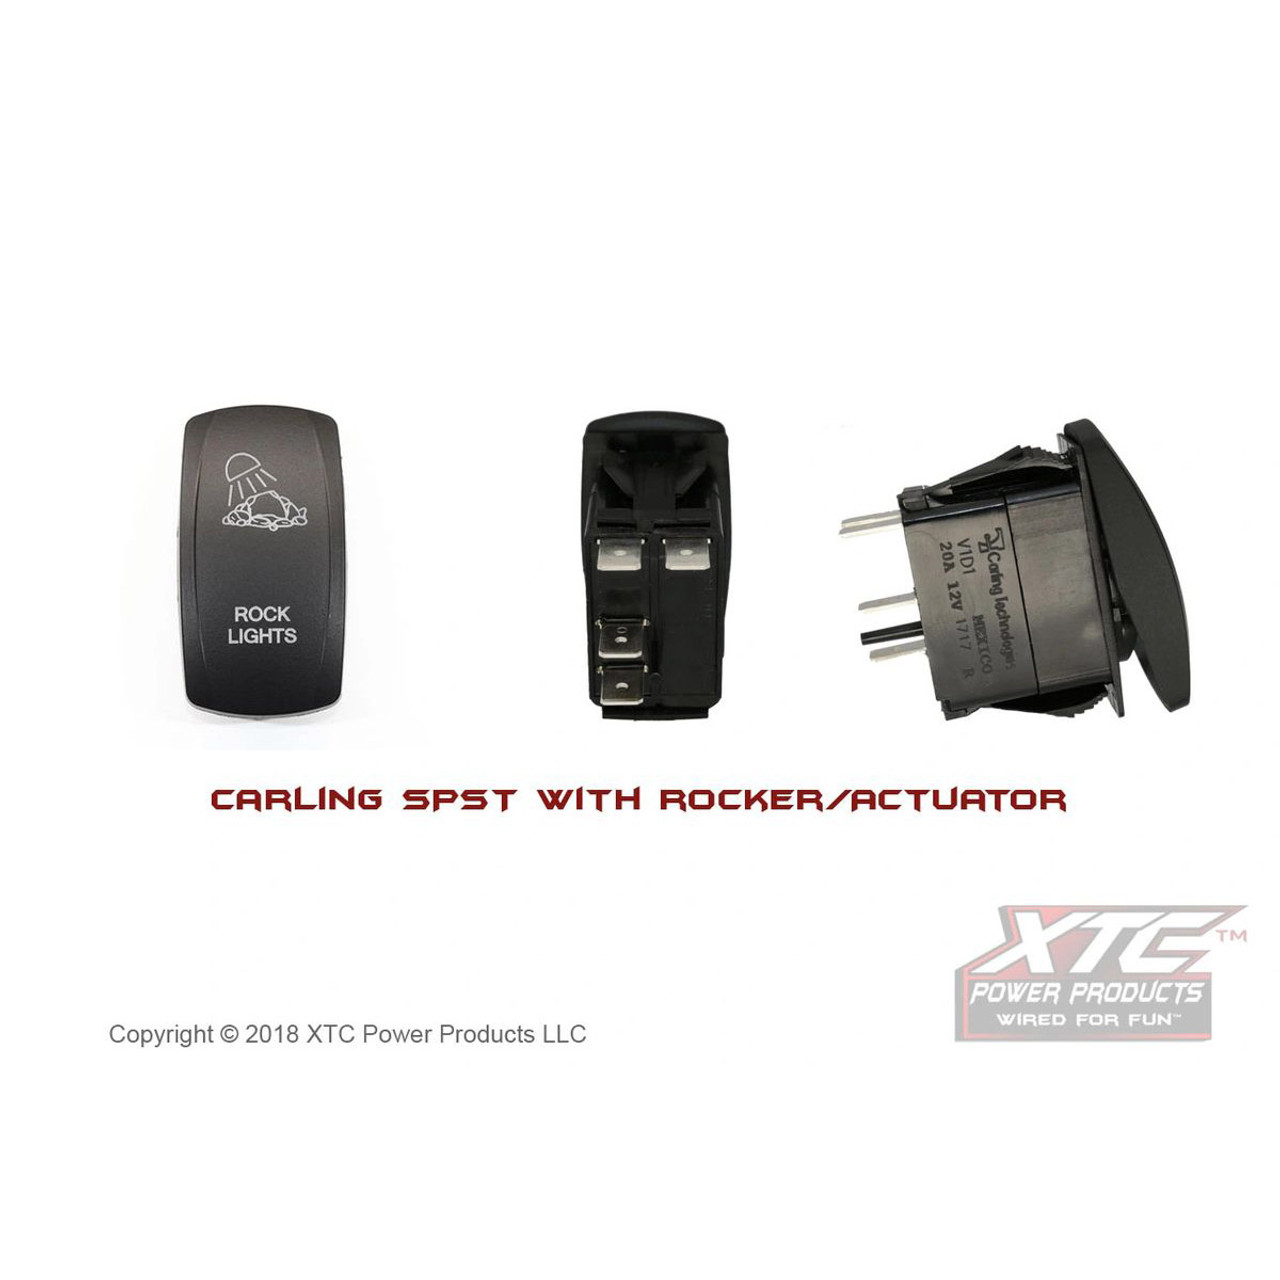 Carling Switch with Rock Lights Actuator/Rocker Additional Image 1